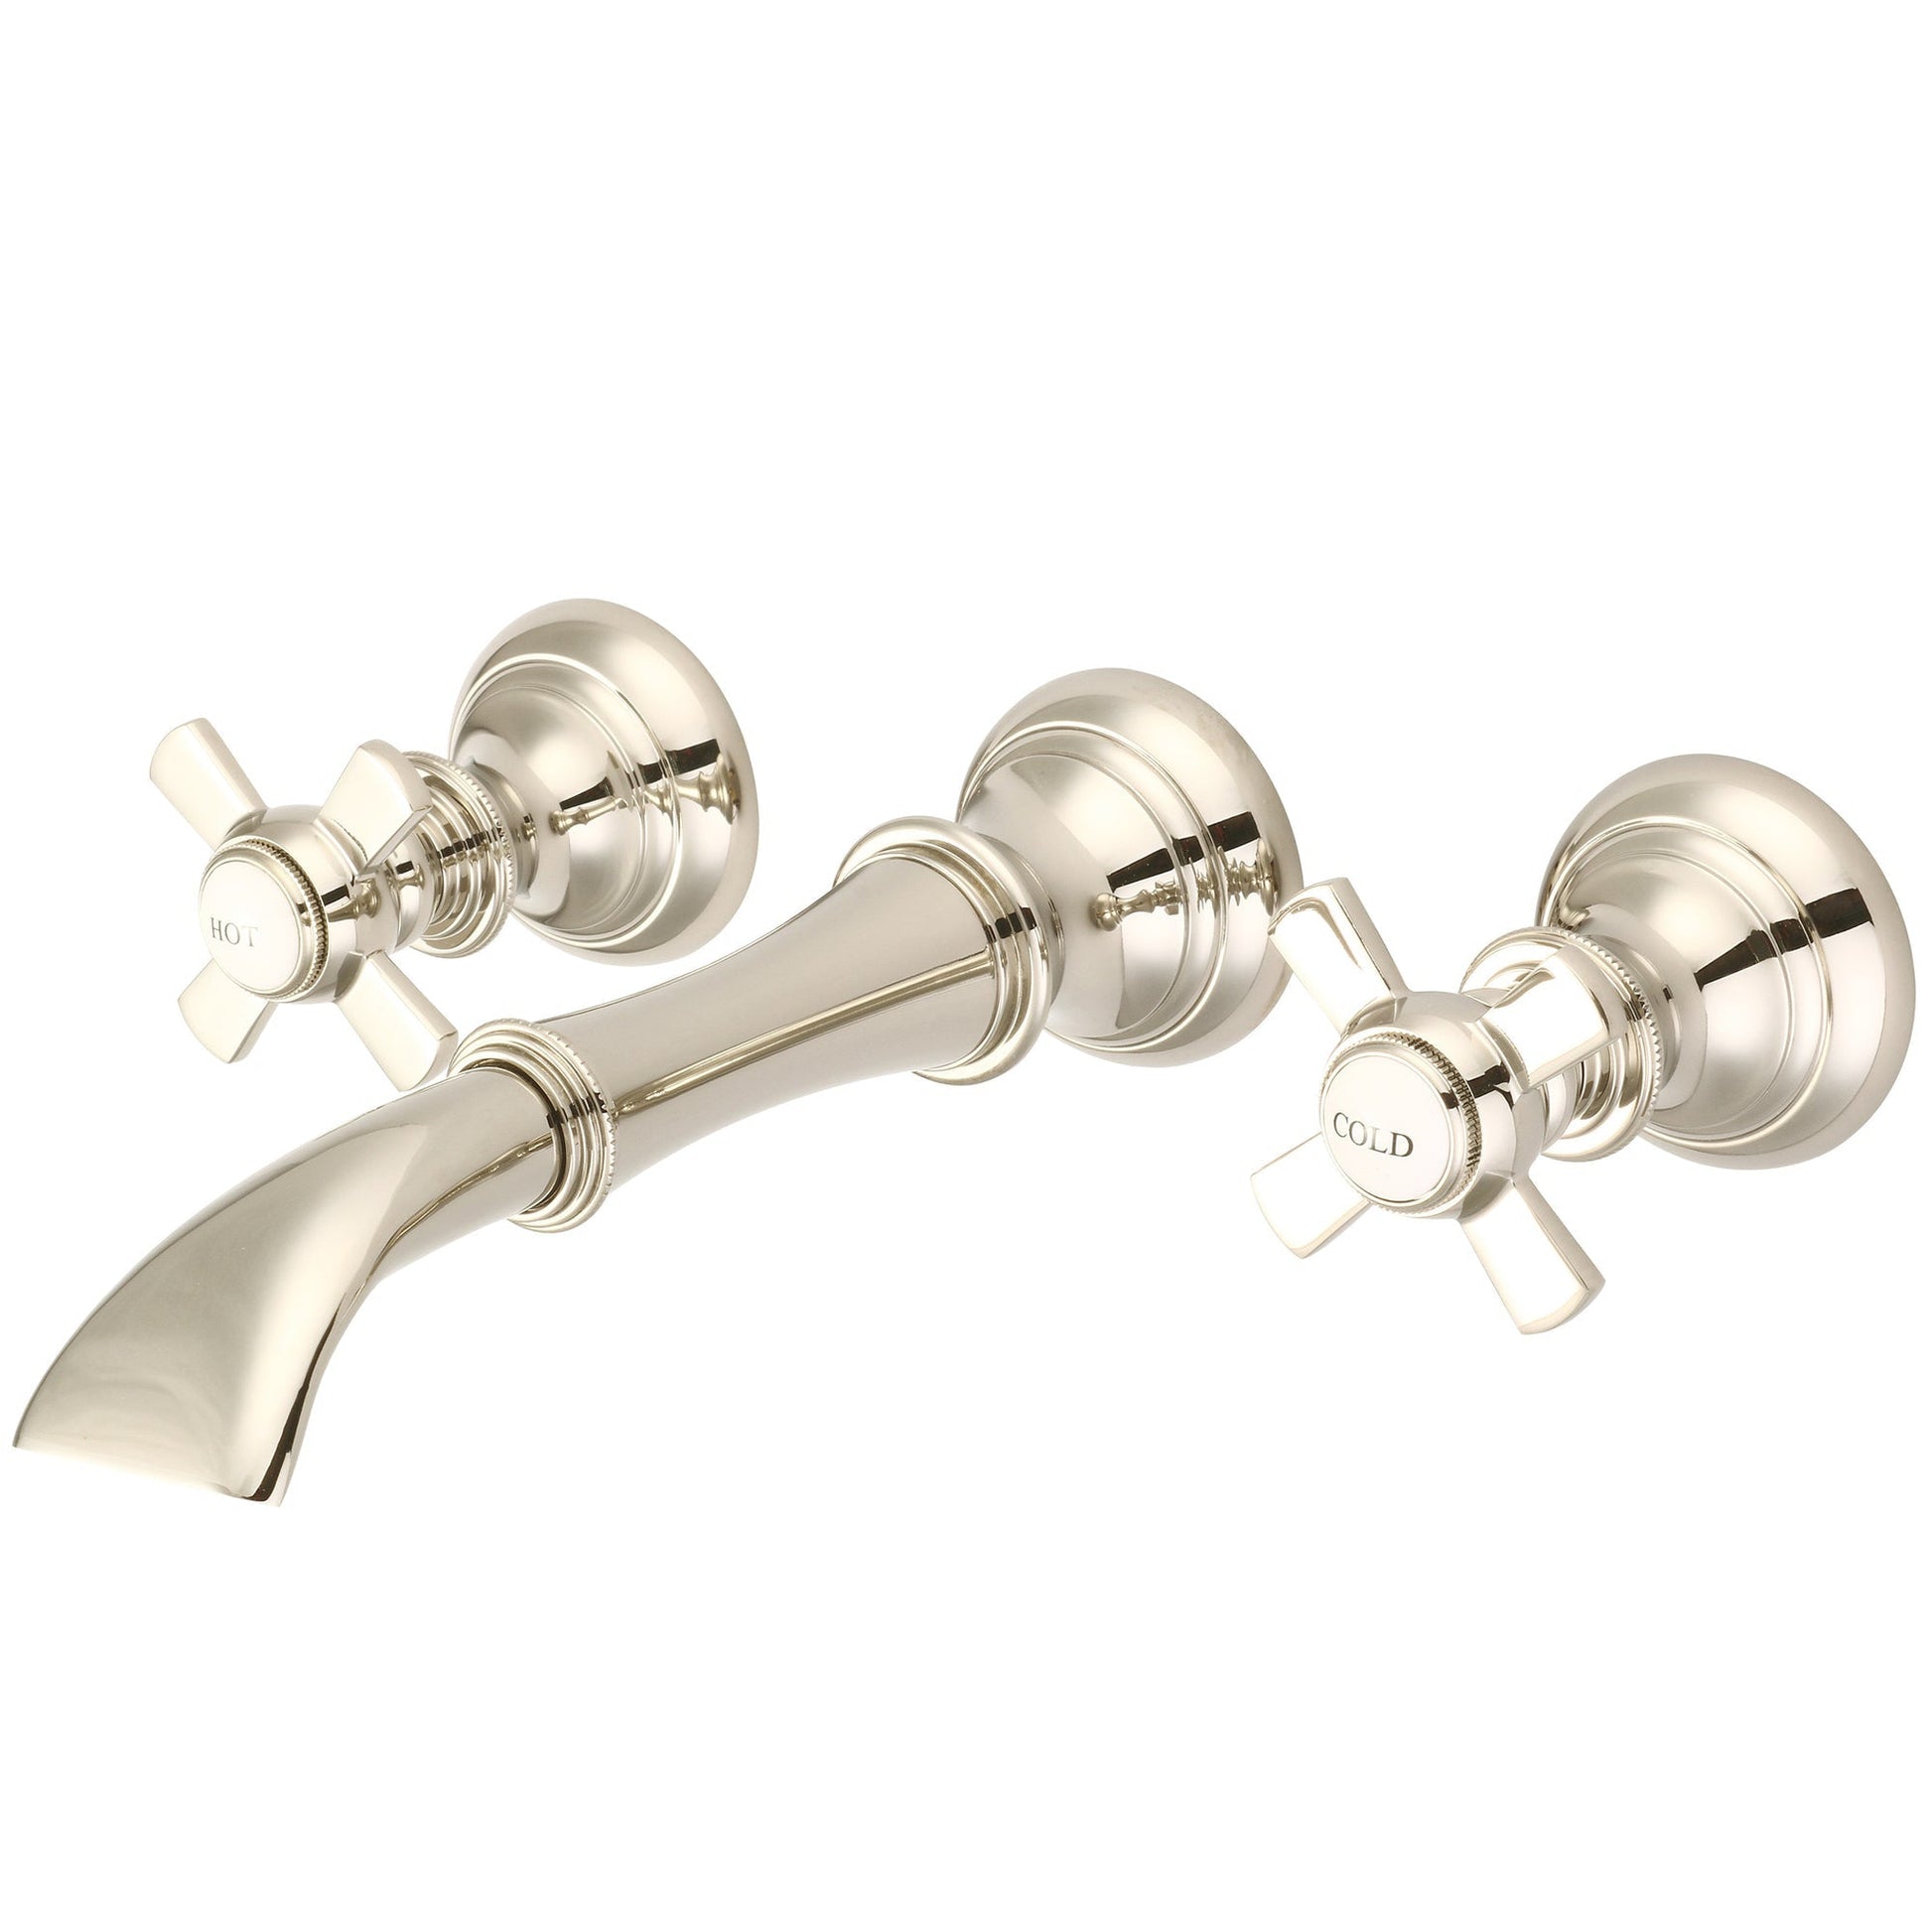 Water Creation Waterfall Style Wall-Mounted Lavatory F4-0004 8" Ivory Solid Brass Faucet